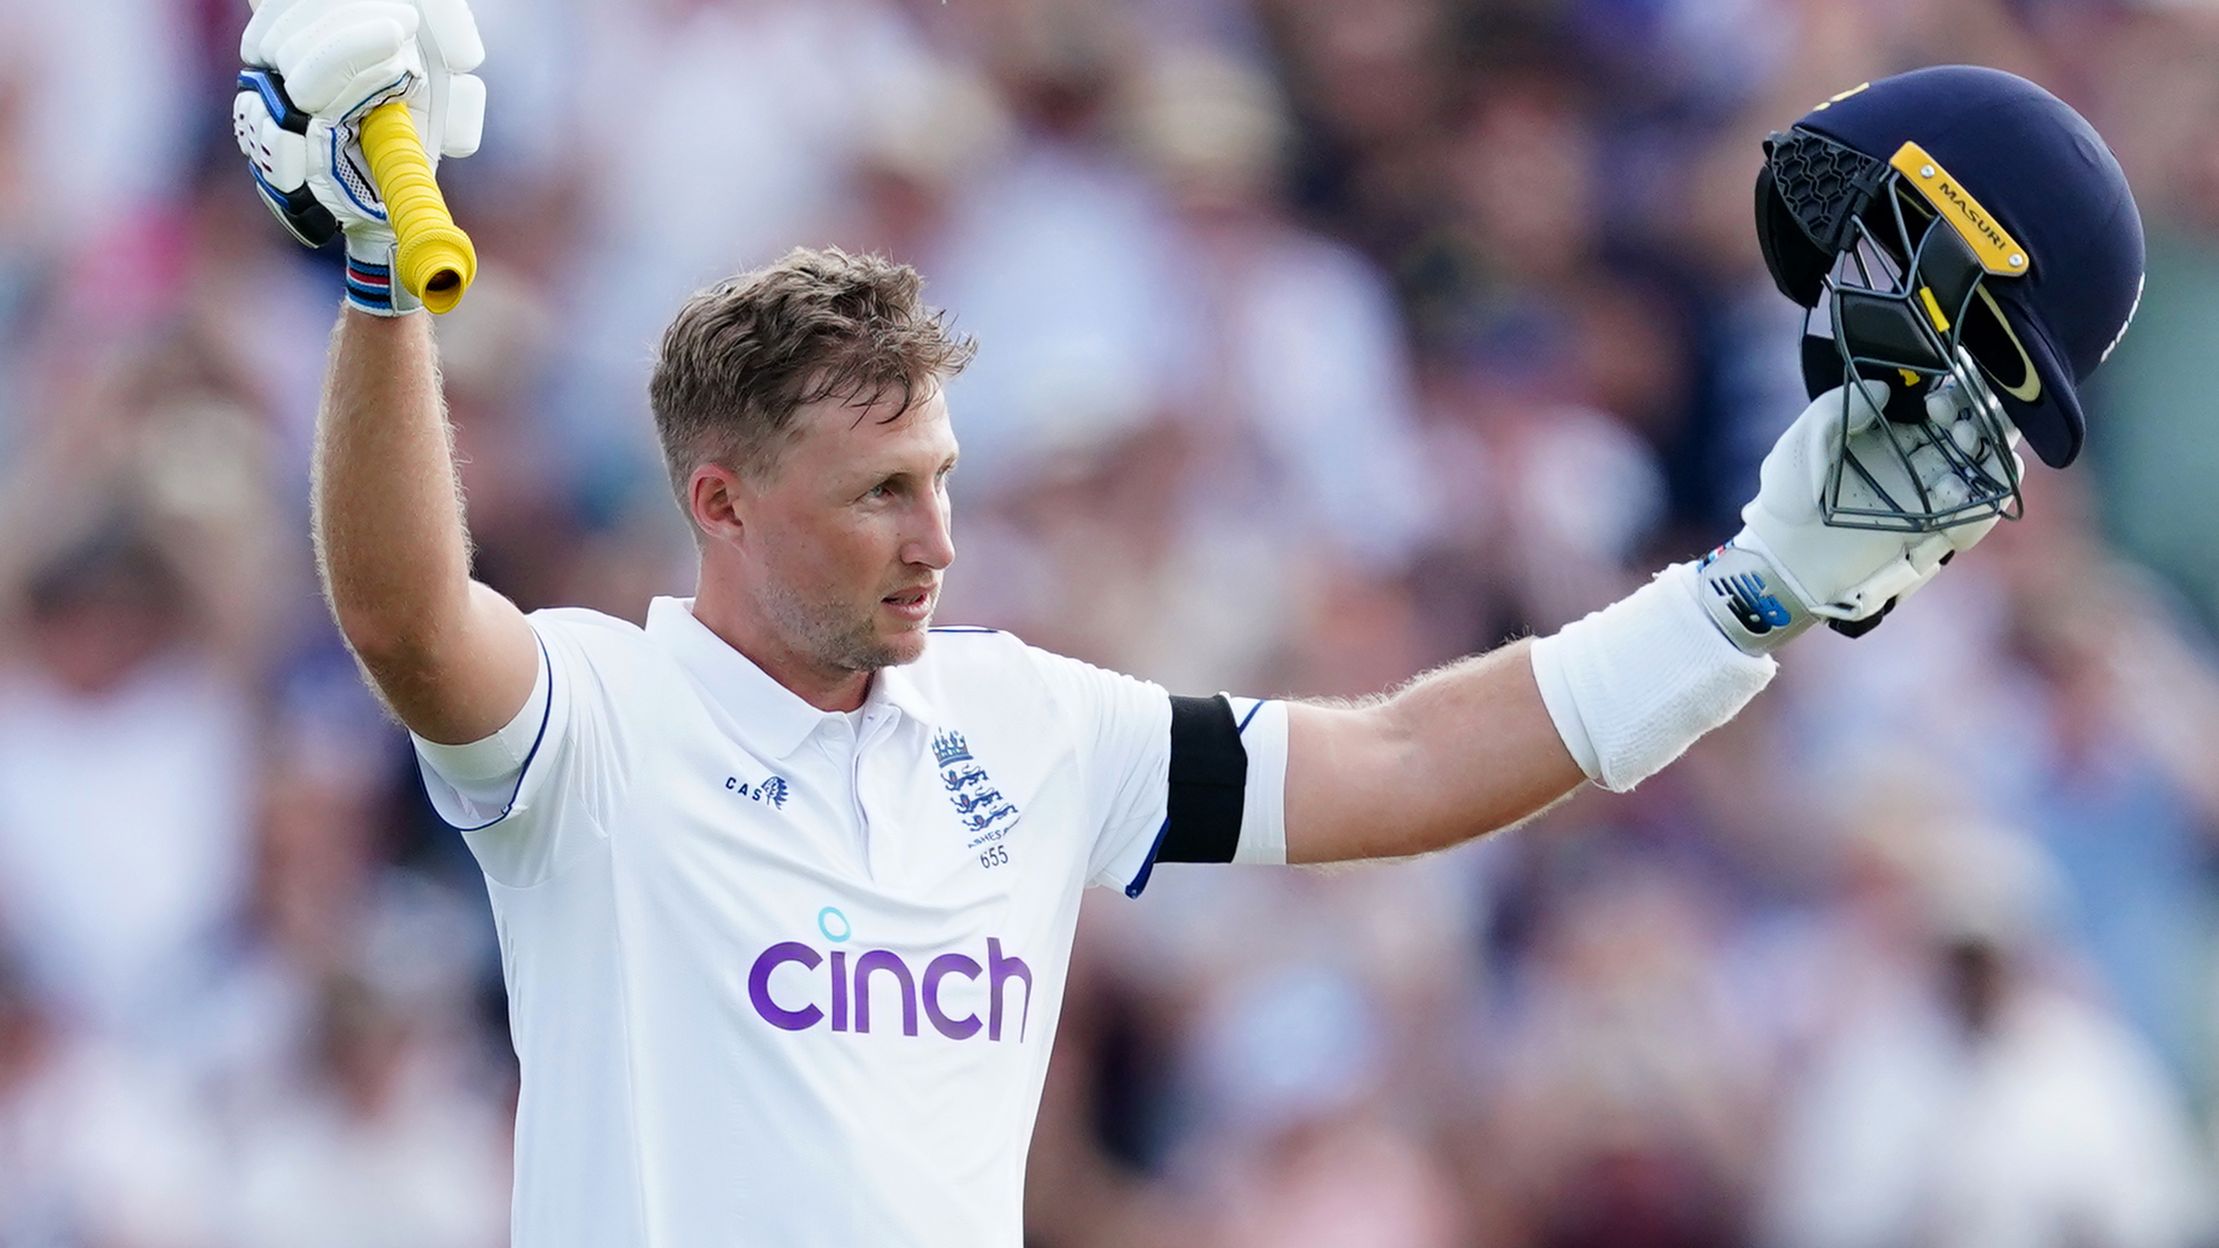 Joe Root rides stupendous strokeplay to 30th Test century as England ends day one on top of Australia